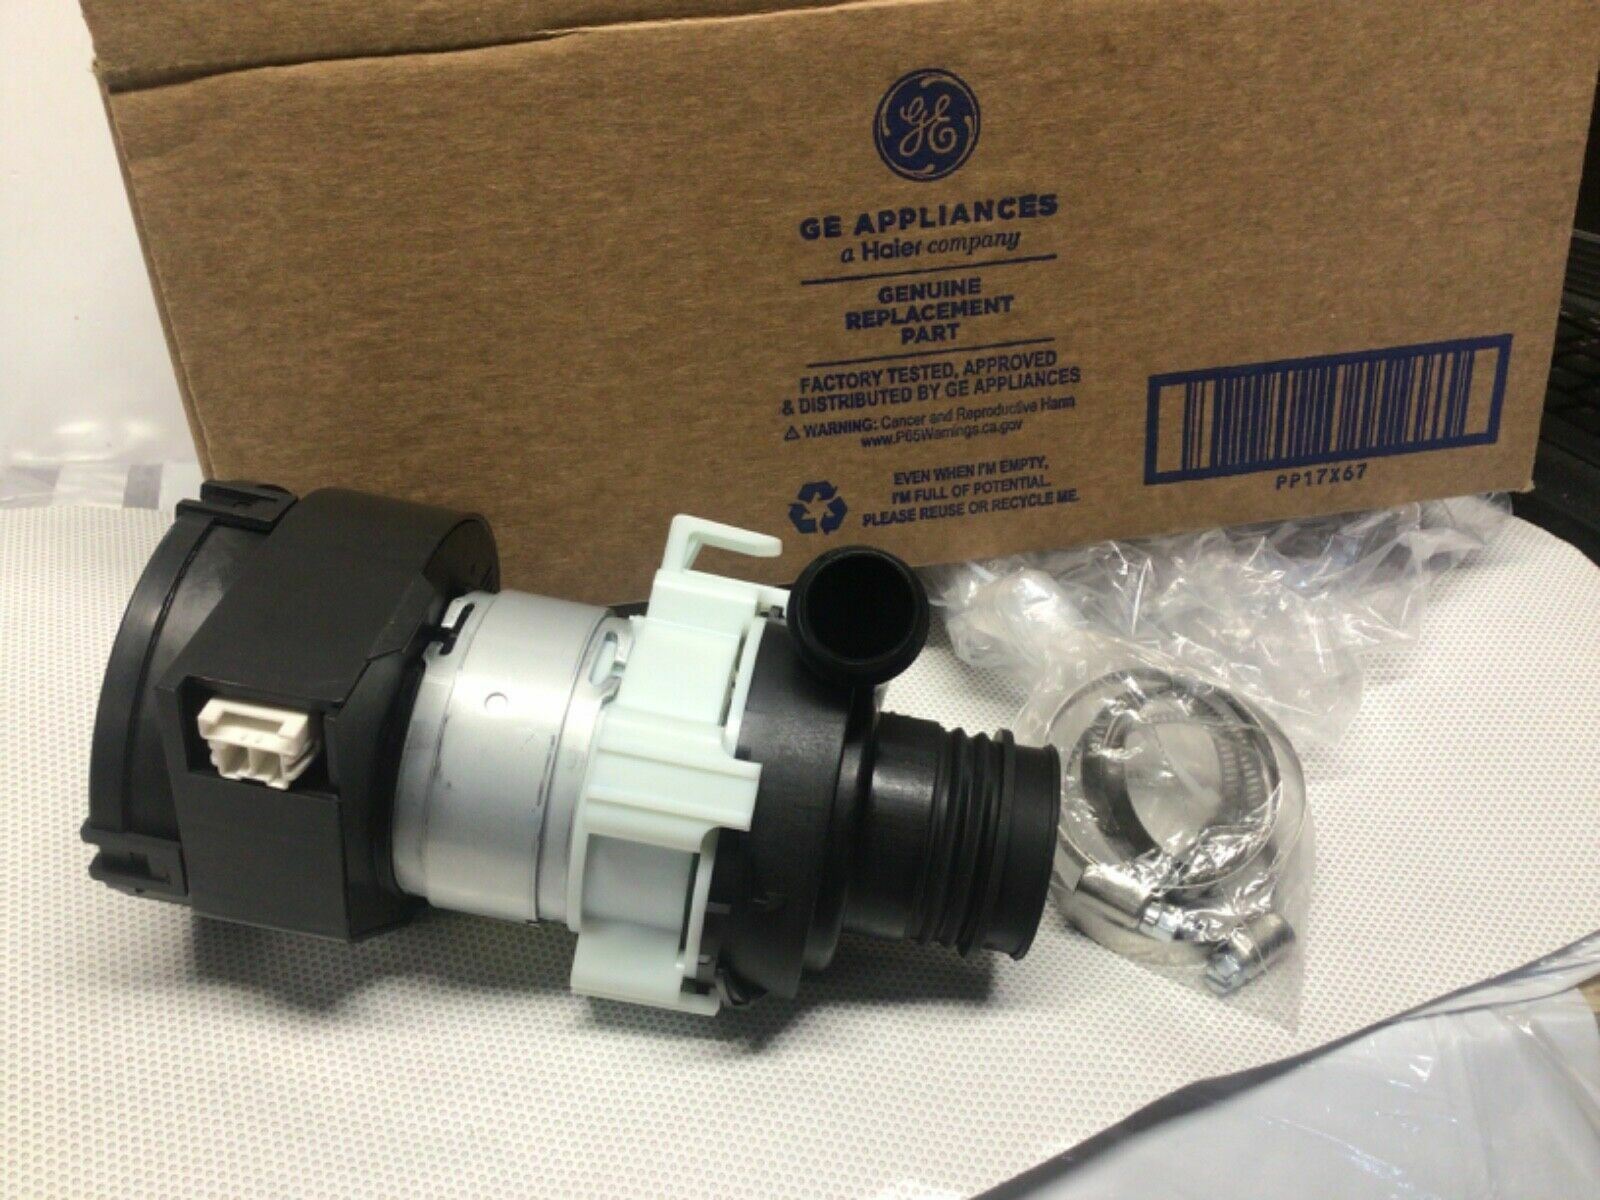 New OEM Genuine WD26x23258 GE Dishwasher Pump Wash Main Motor With Clamps